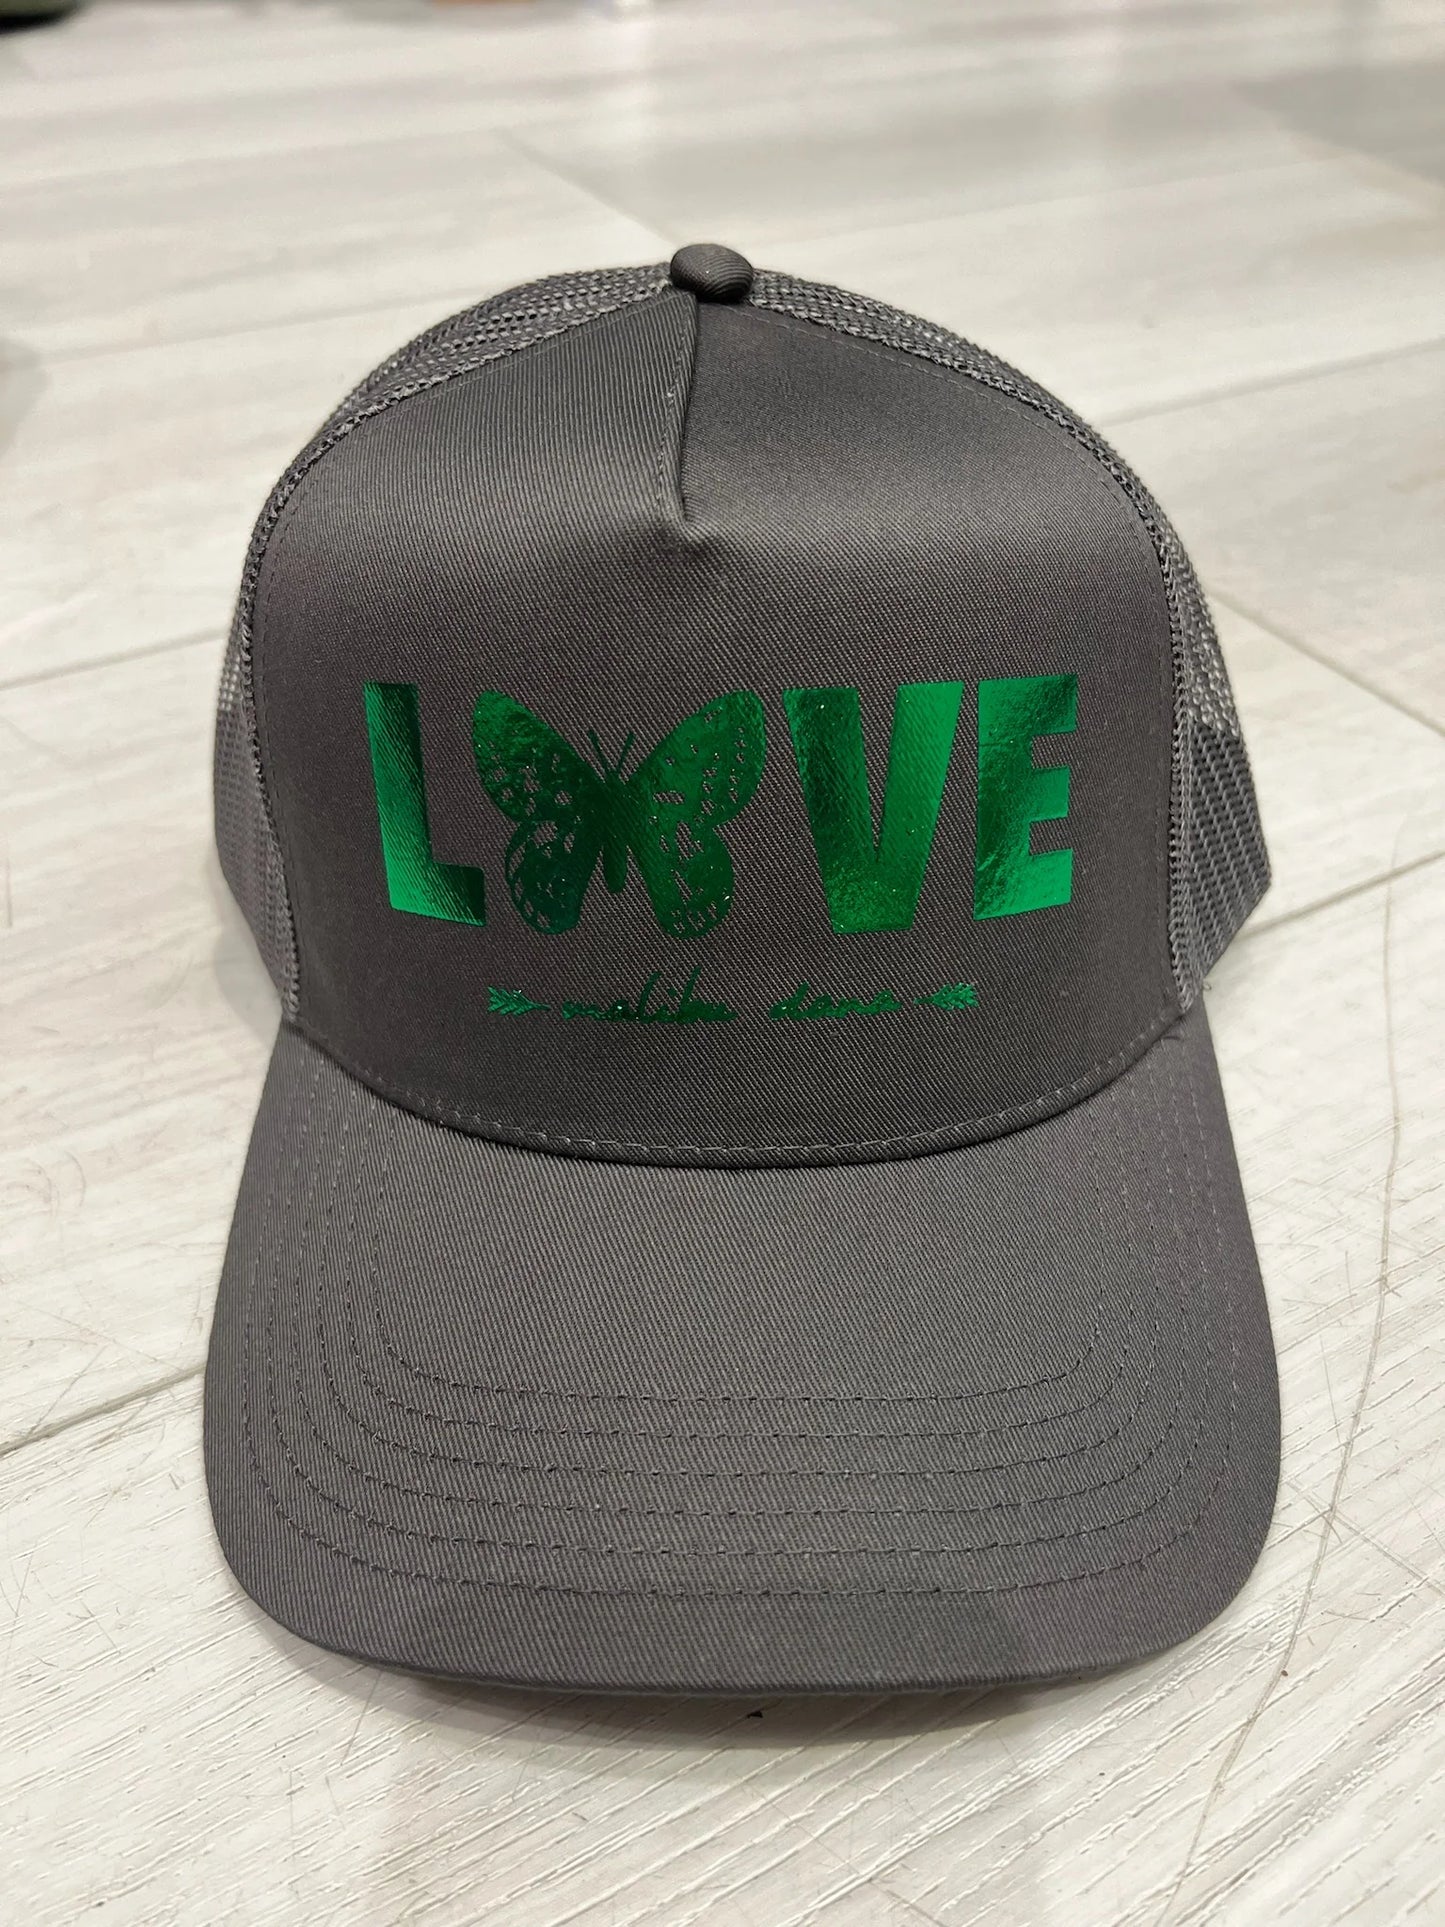 NEW Holiday Butterfly Love // Trucker Hats